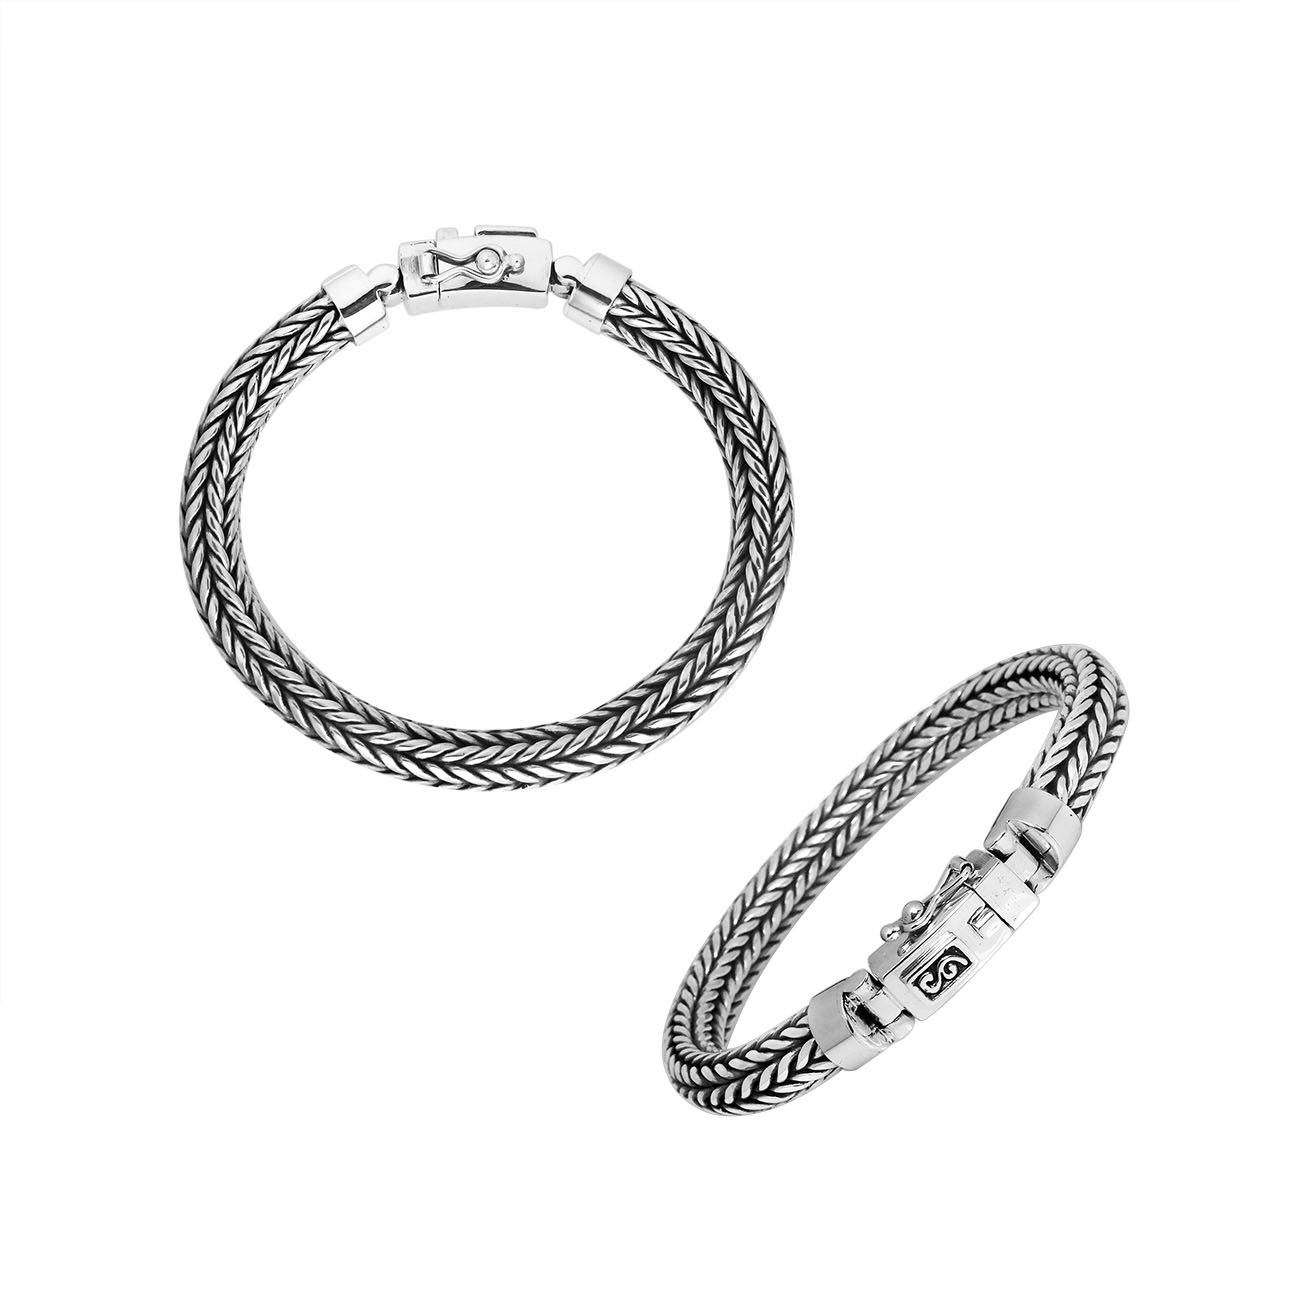 AB-1105-S-7.5" Sterling Silver Bracelet With Plain Silver